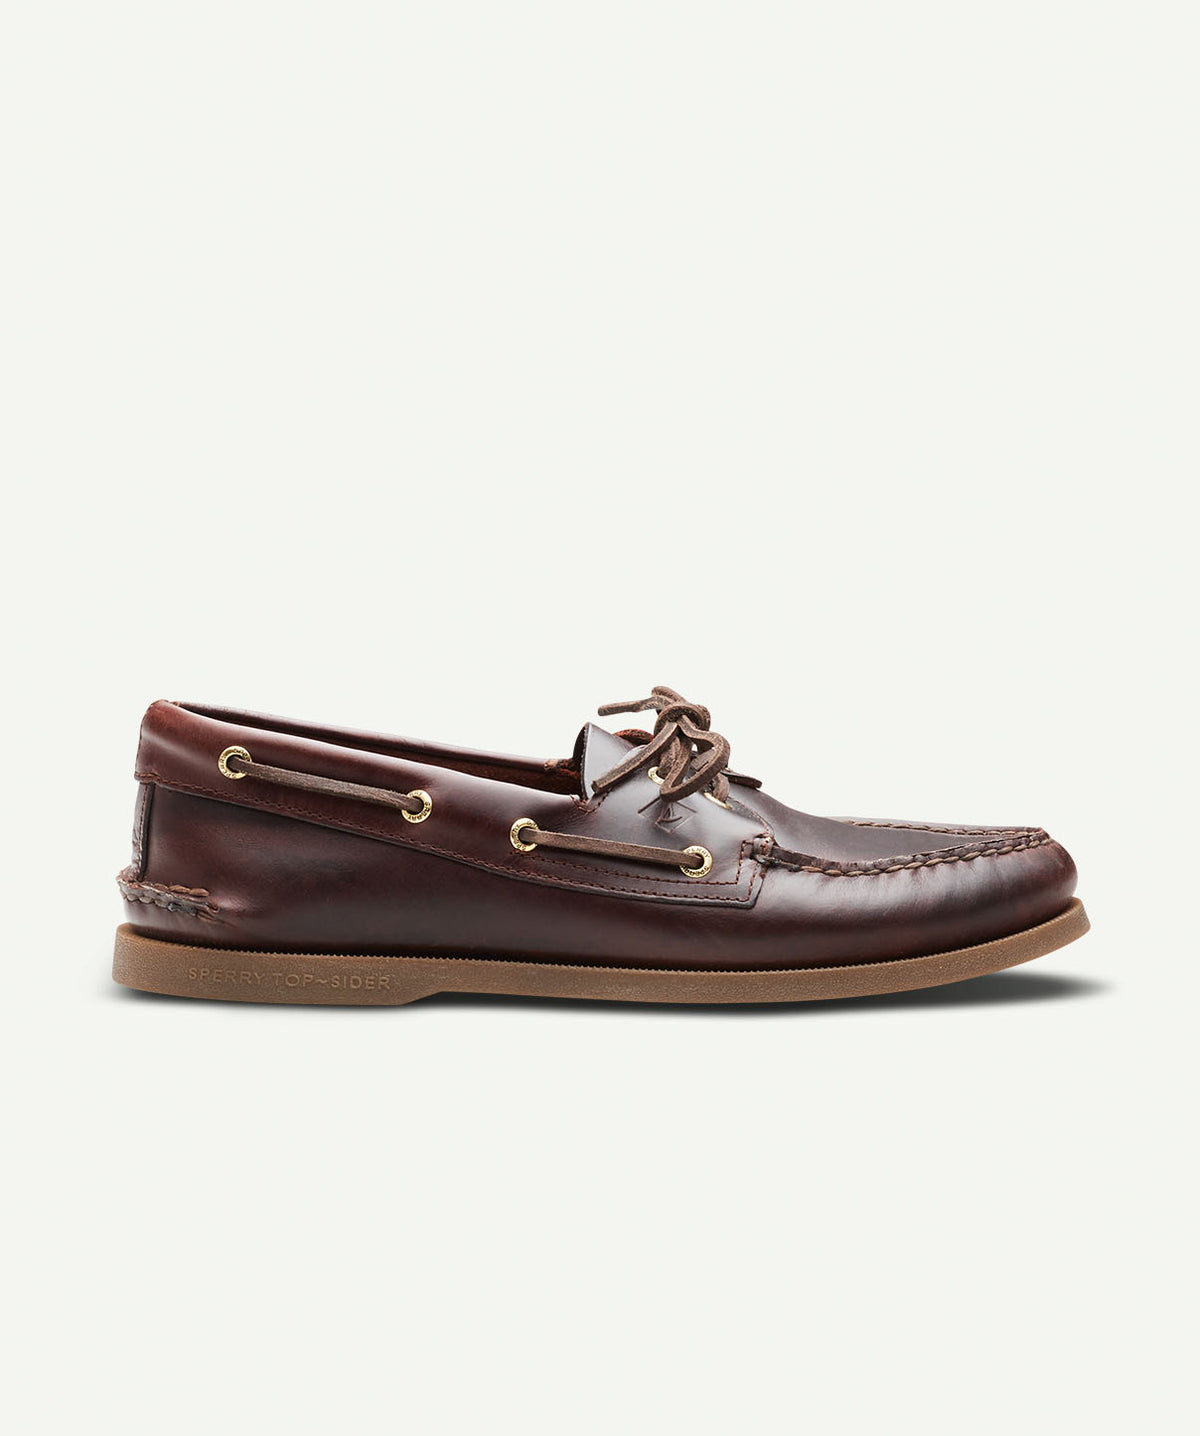 sperry sider shoes